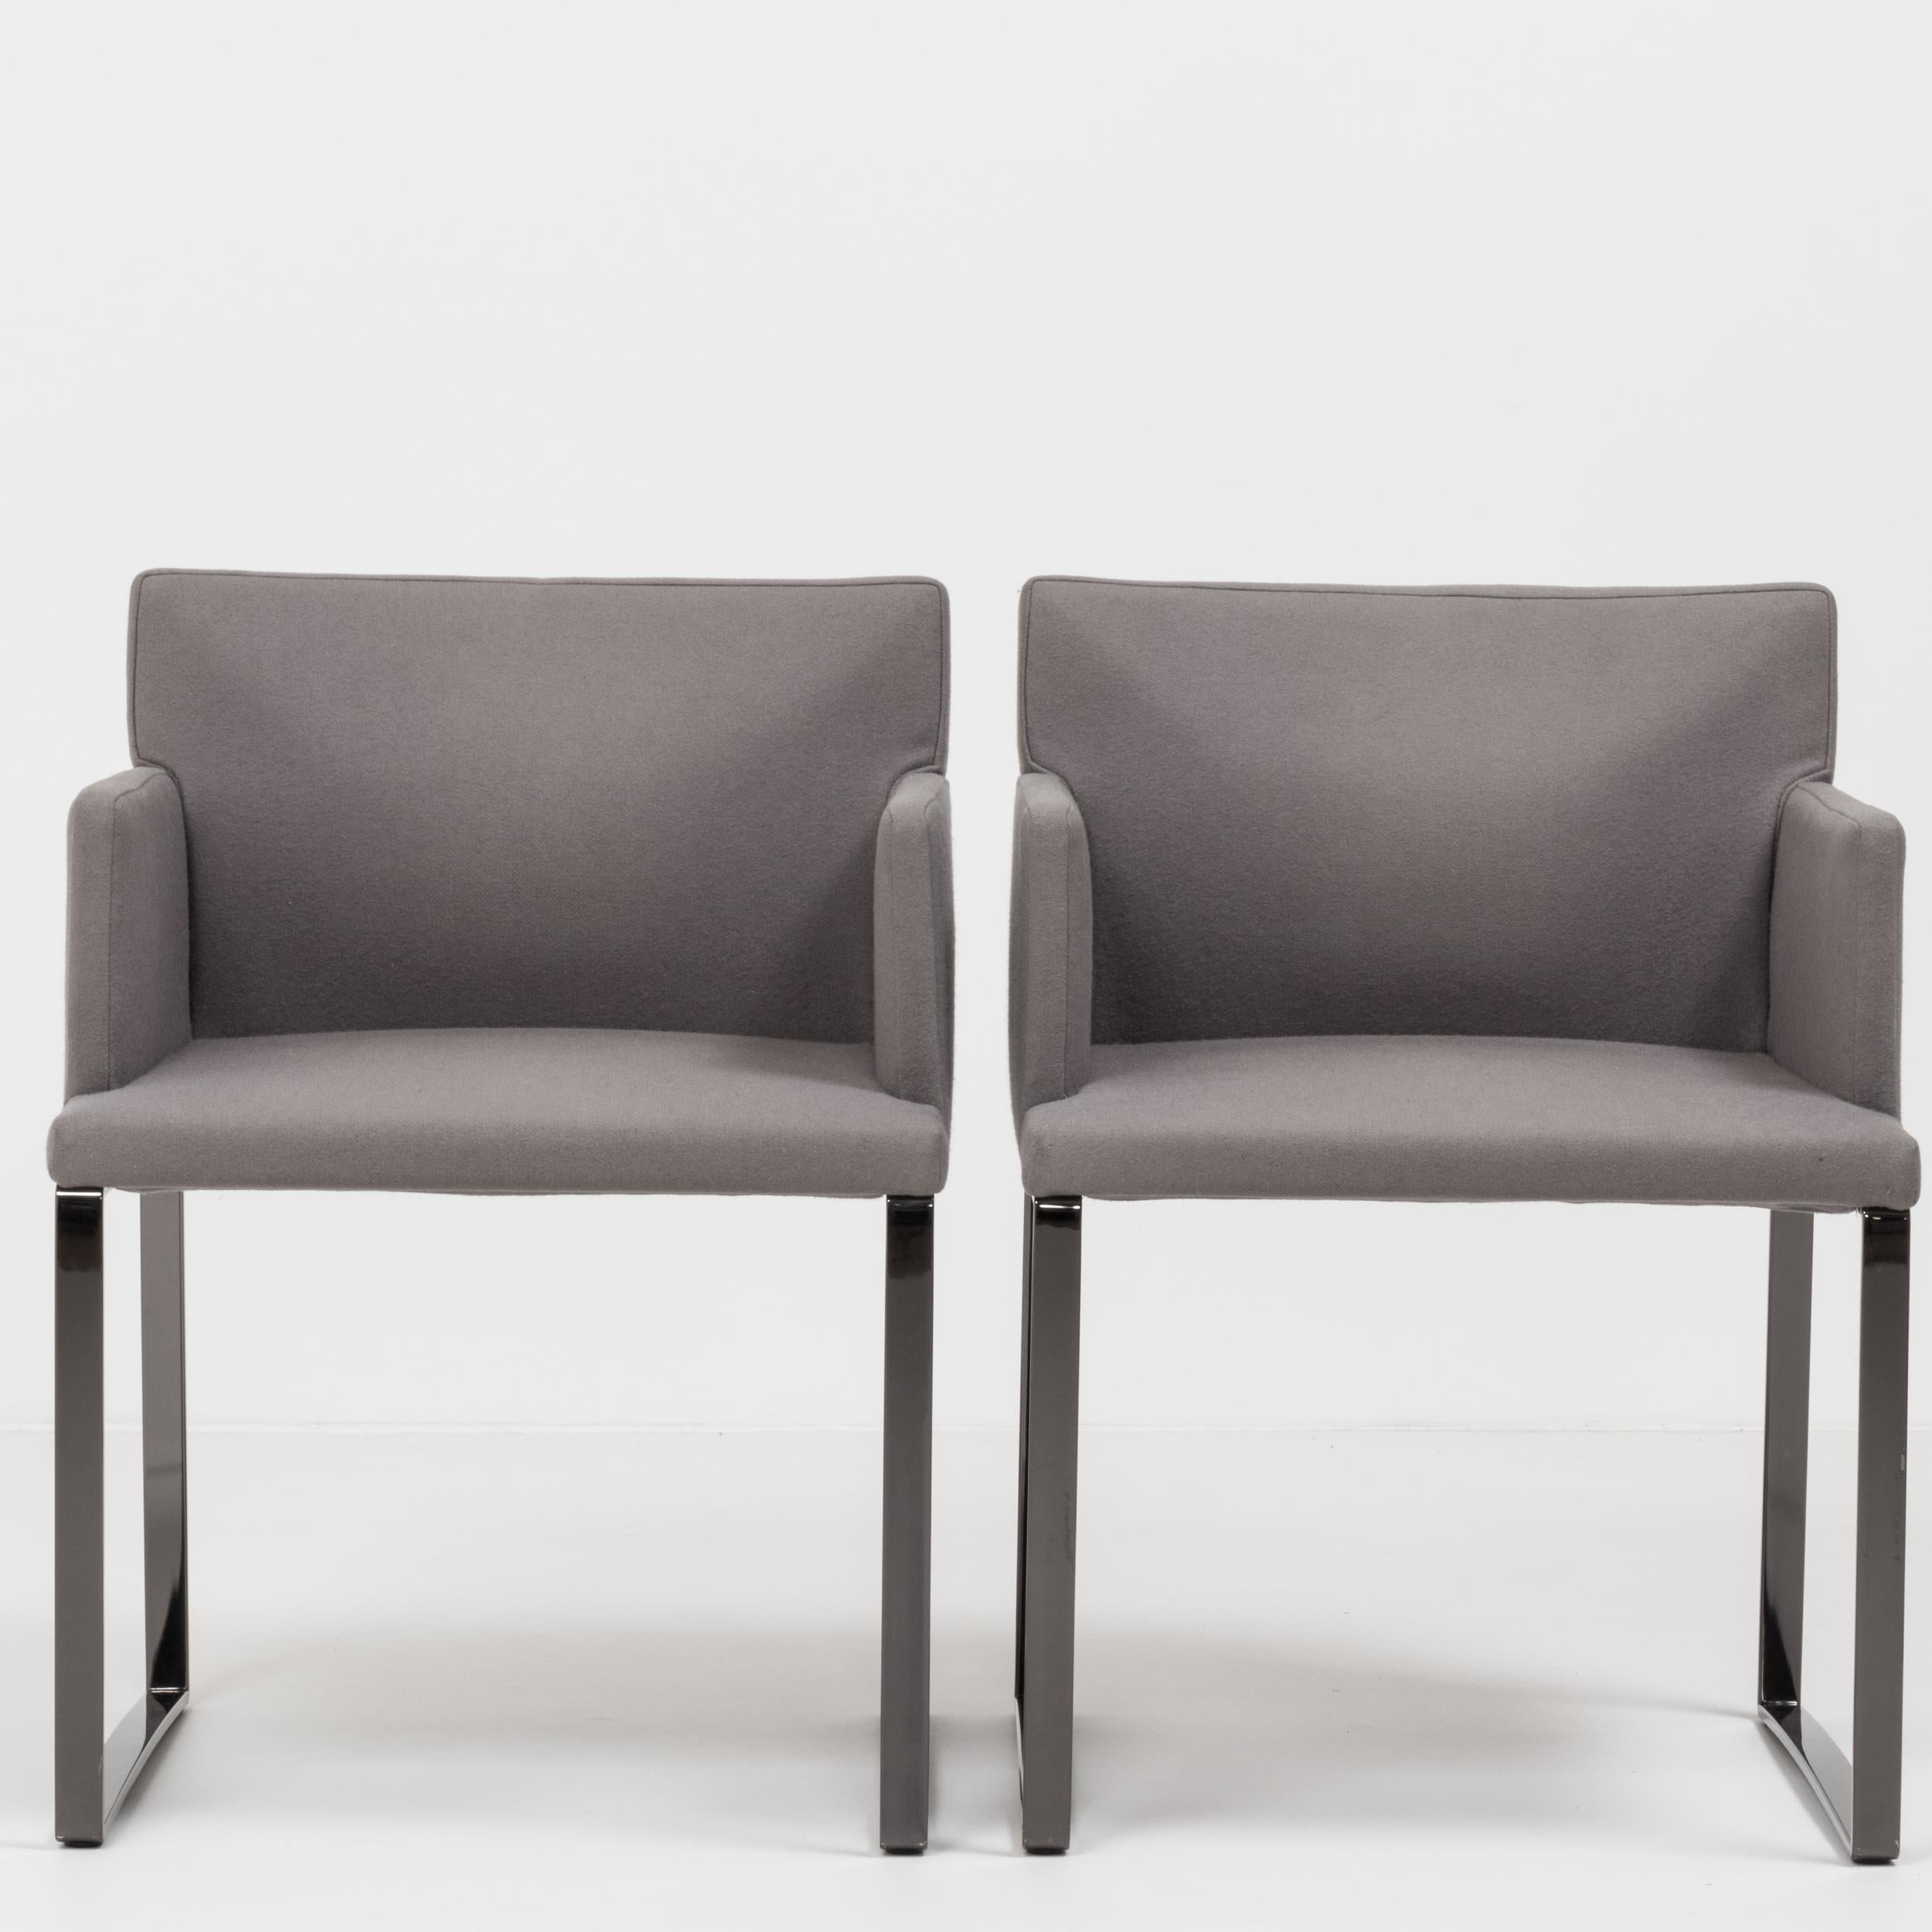 Designed by Rodolfo Dordoni for Minotti, these flat-base Flynt armchairs have a sleek and angular Silhouette.

Featuring square, glossy pewter metal frames, the chairs are upholstered in grey wool fabric with a padded back and seat for ultimate